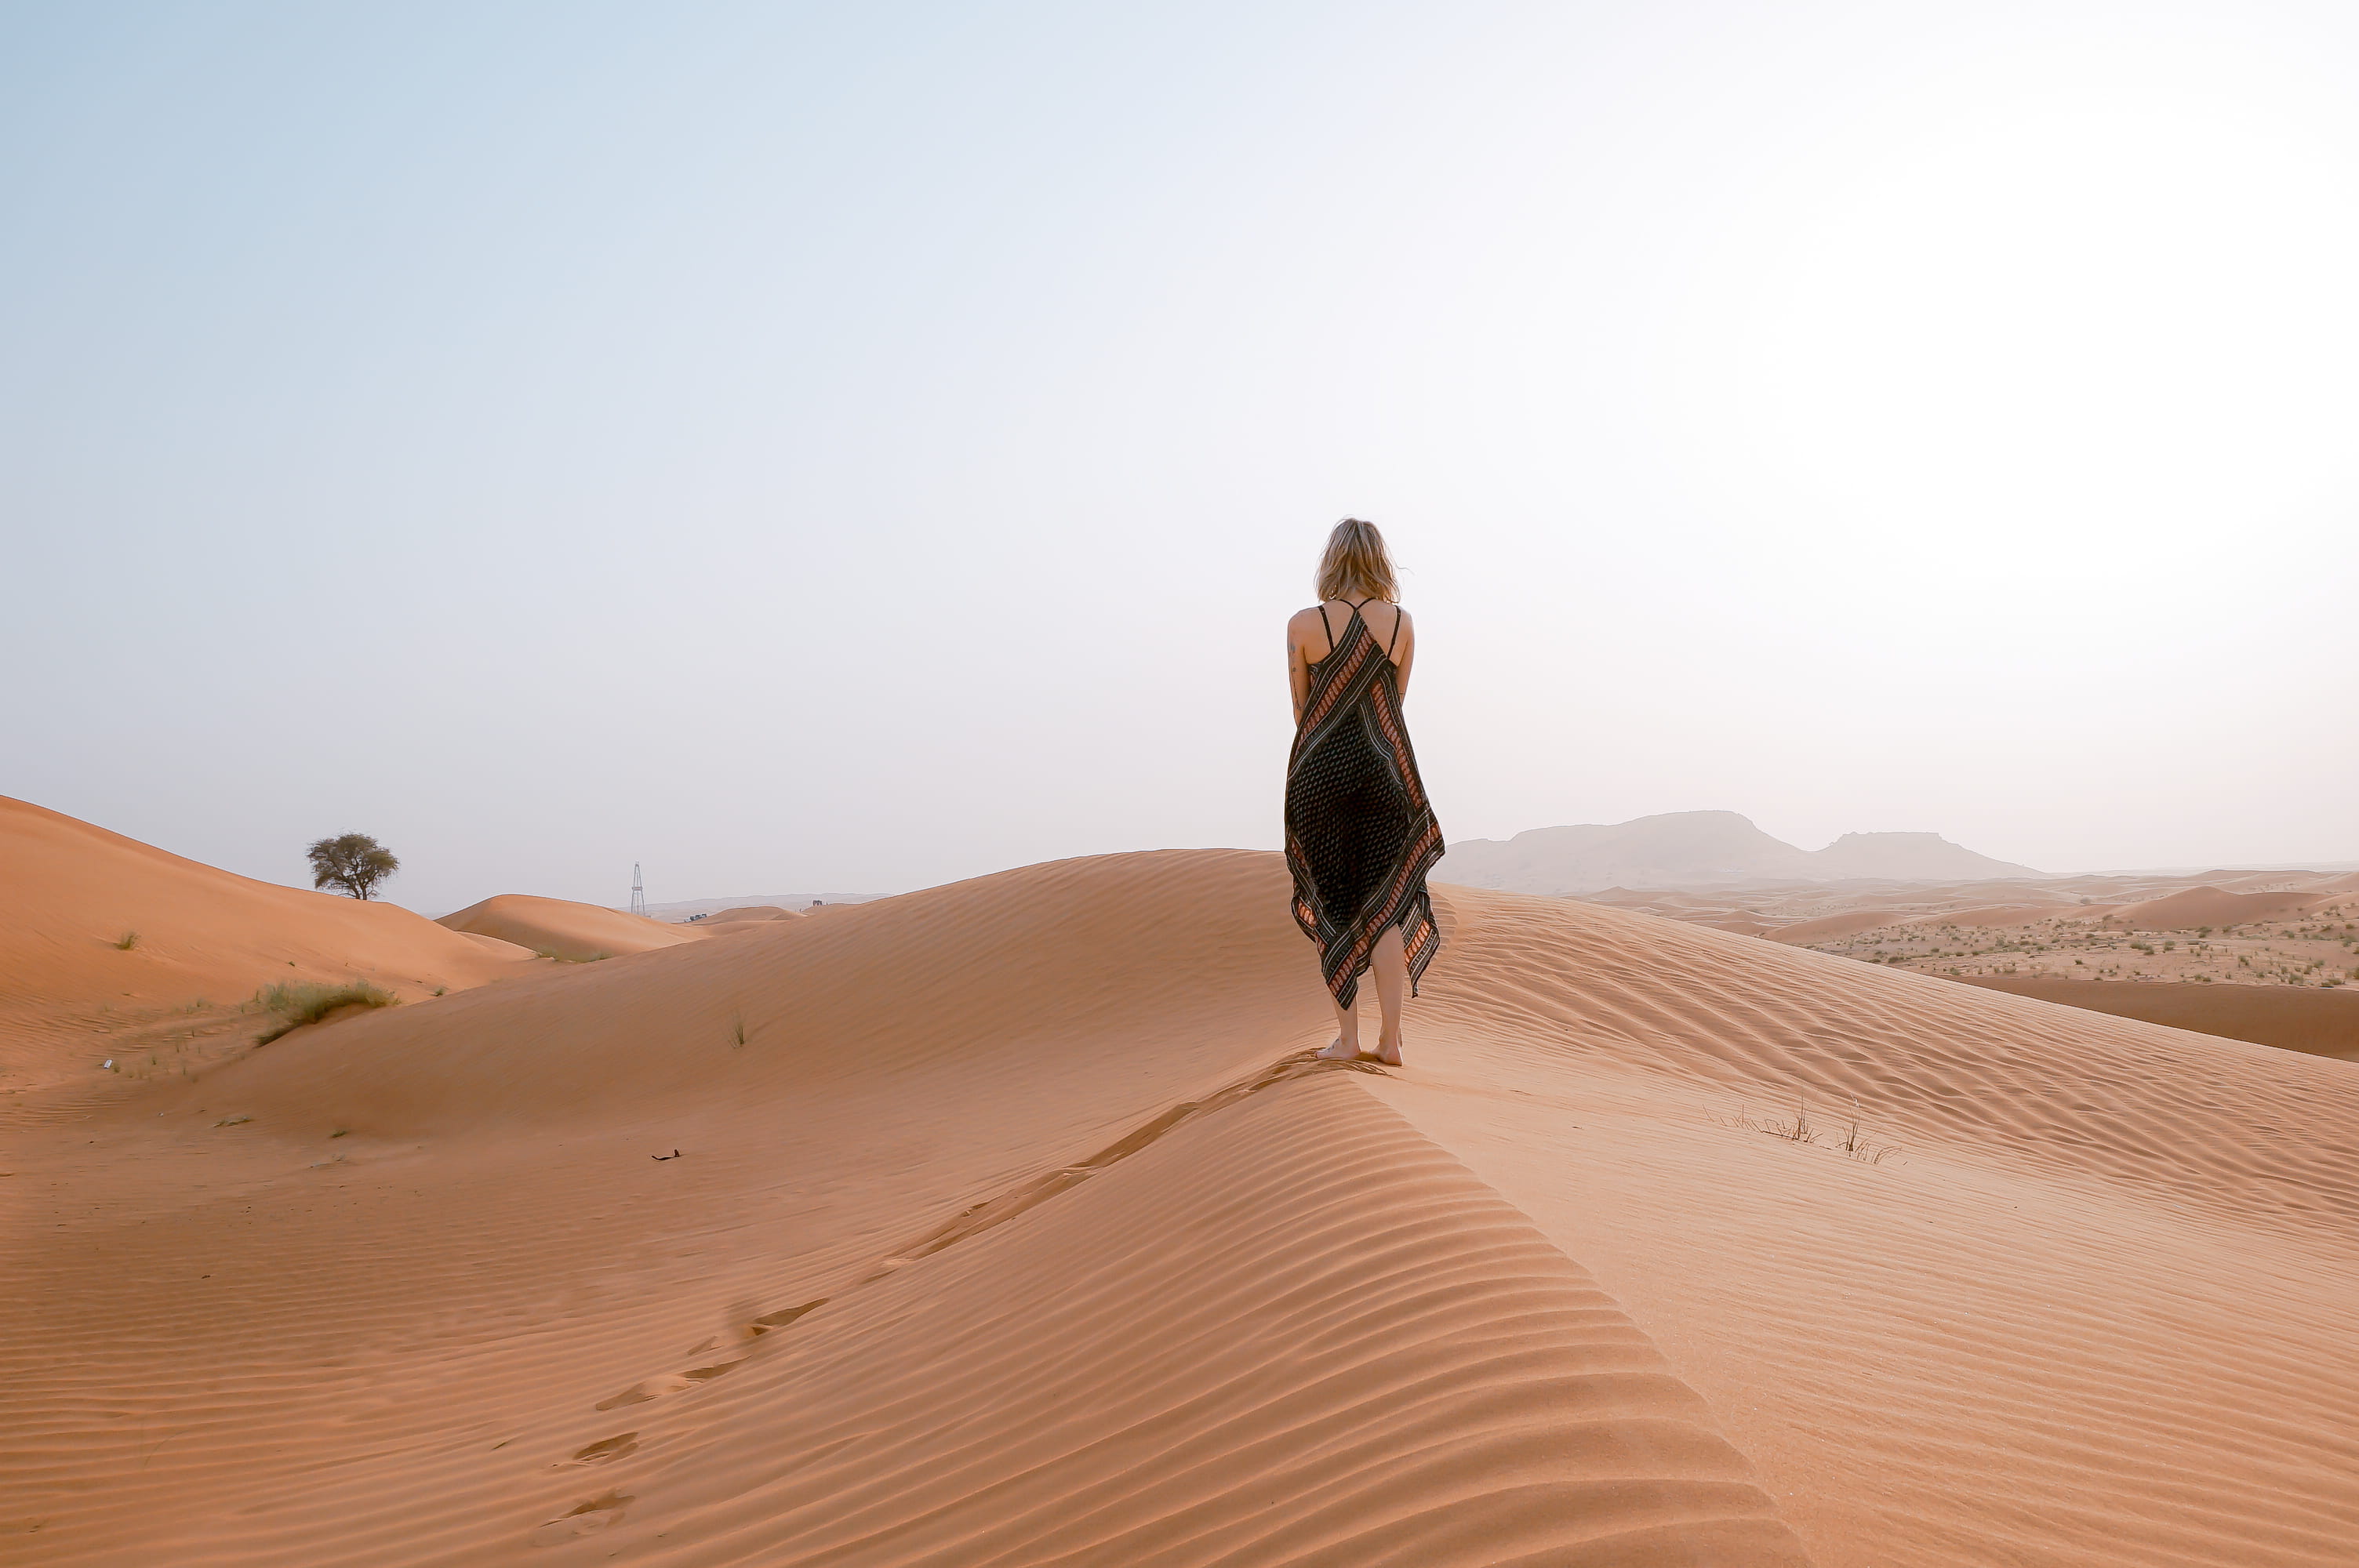 woman walking on desert during daytime, woman stands on brown sand